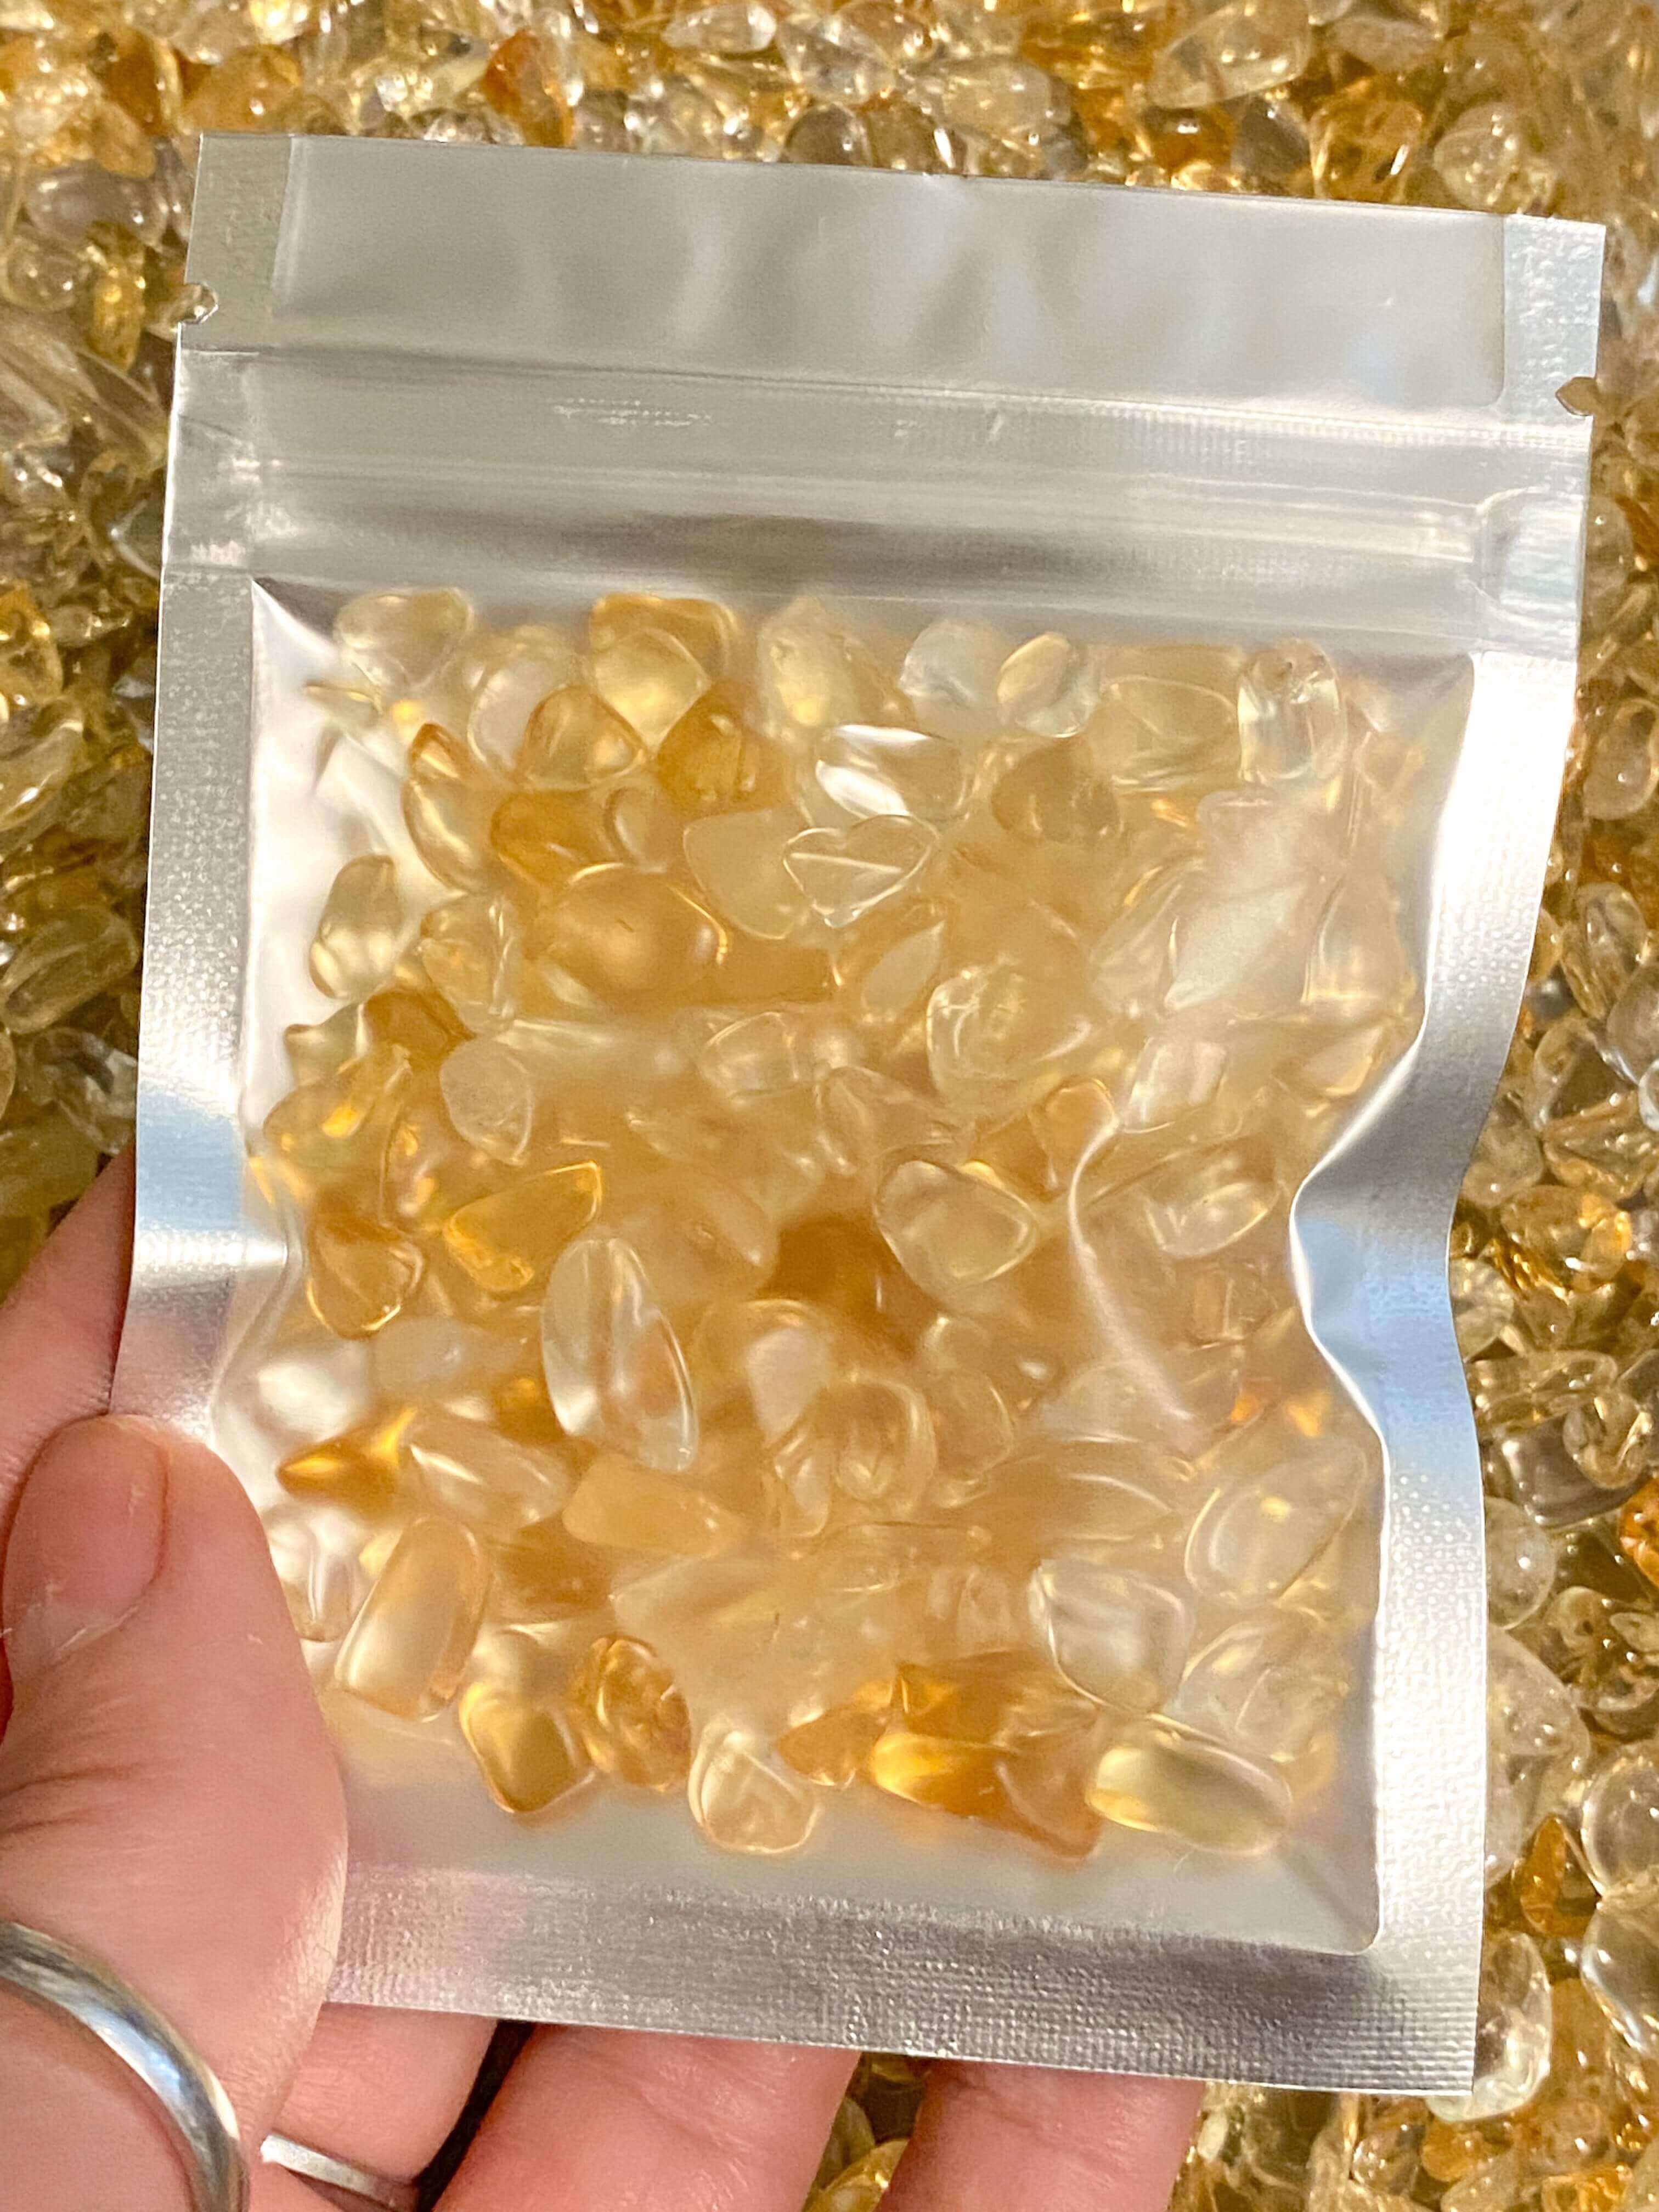 High Quality Natural (Untreated) Citrine Chips Mooncat Crystals